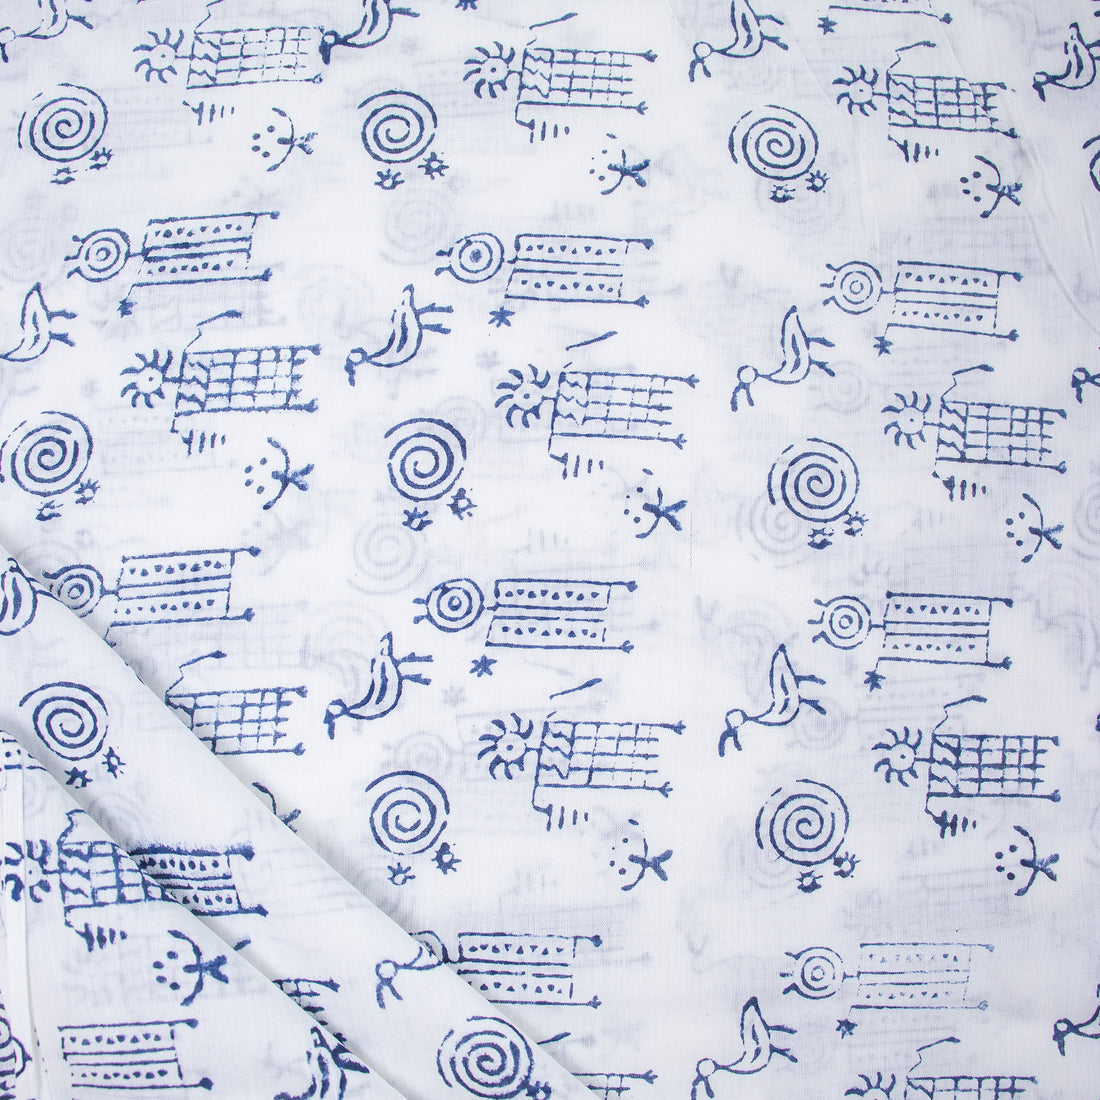 Hand Block Abstract Print Fabric For Dress Material Online